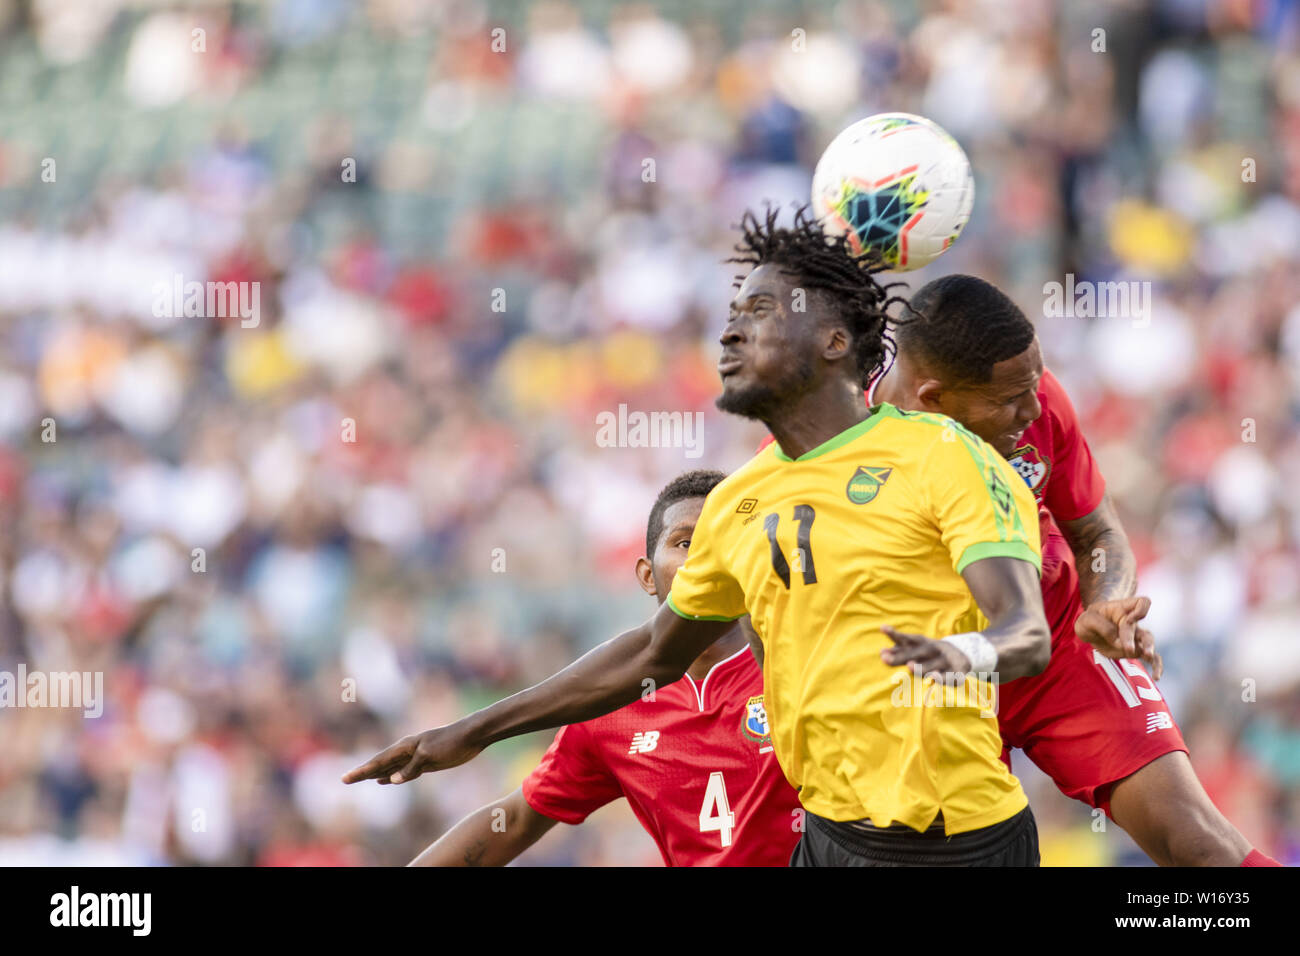 June 30, 2019, Philadelphia, Pennsylvania, USA: Jamaica's ARMANDO COOPER (11) fights for the ball against ERIC DAVIS (15) of Panama during their CONCACAF Gold Cup semi-final match. Credit: Ricky Fitchett/ZUMA Wire/Alamy Live News Stock Photo